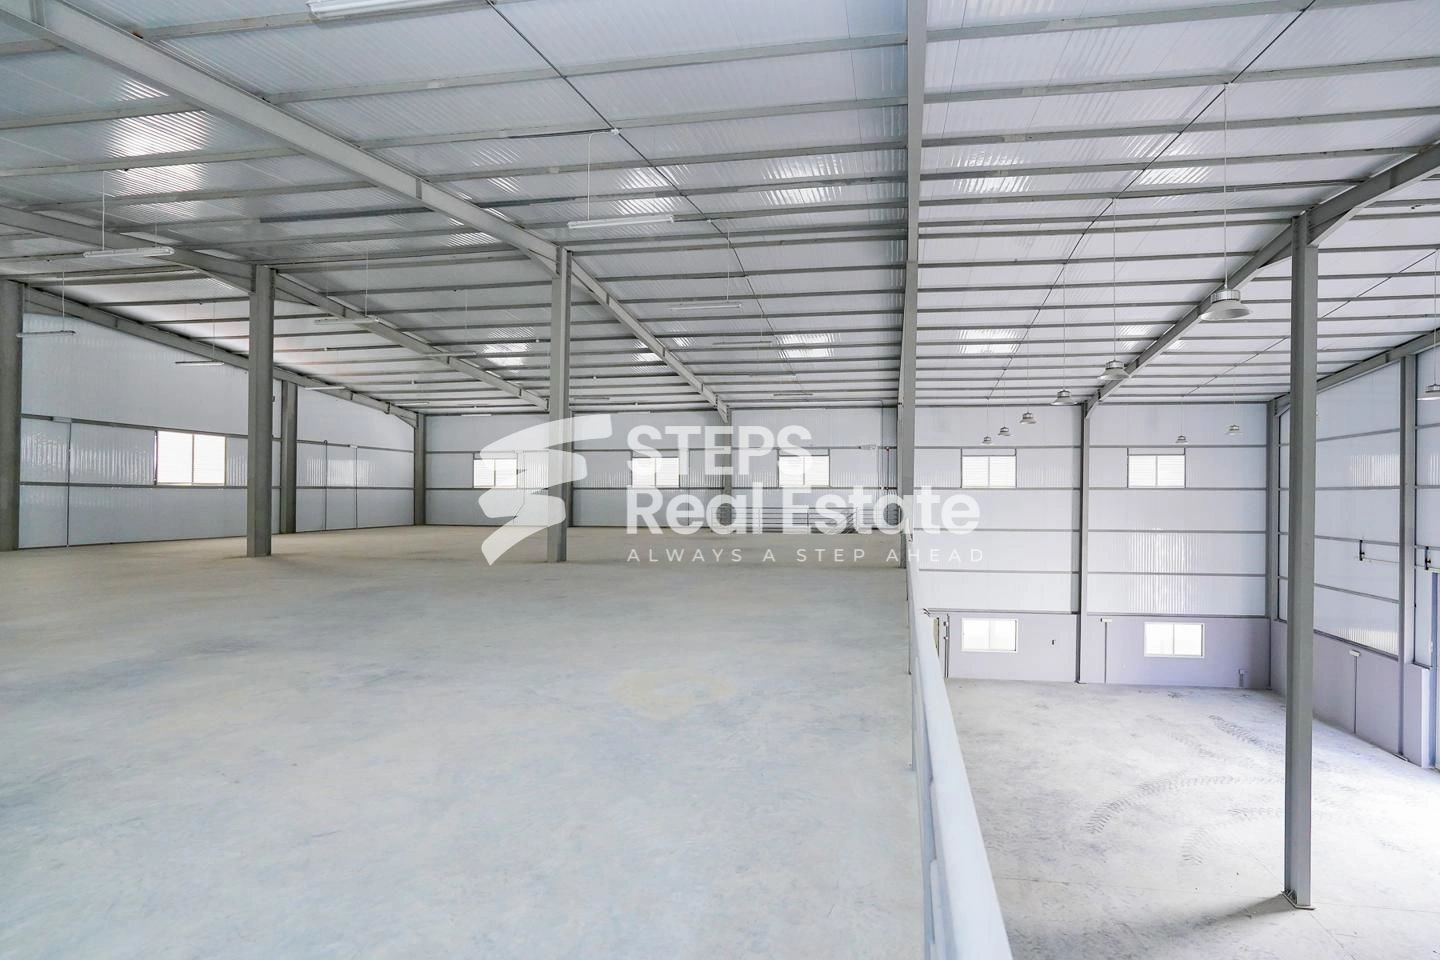 4000-SQM Store with Clearance Approved